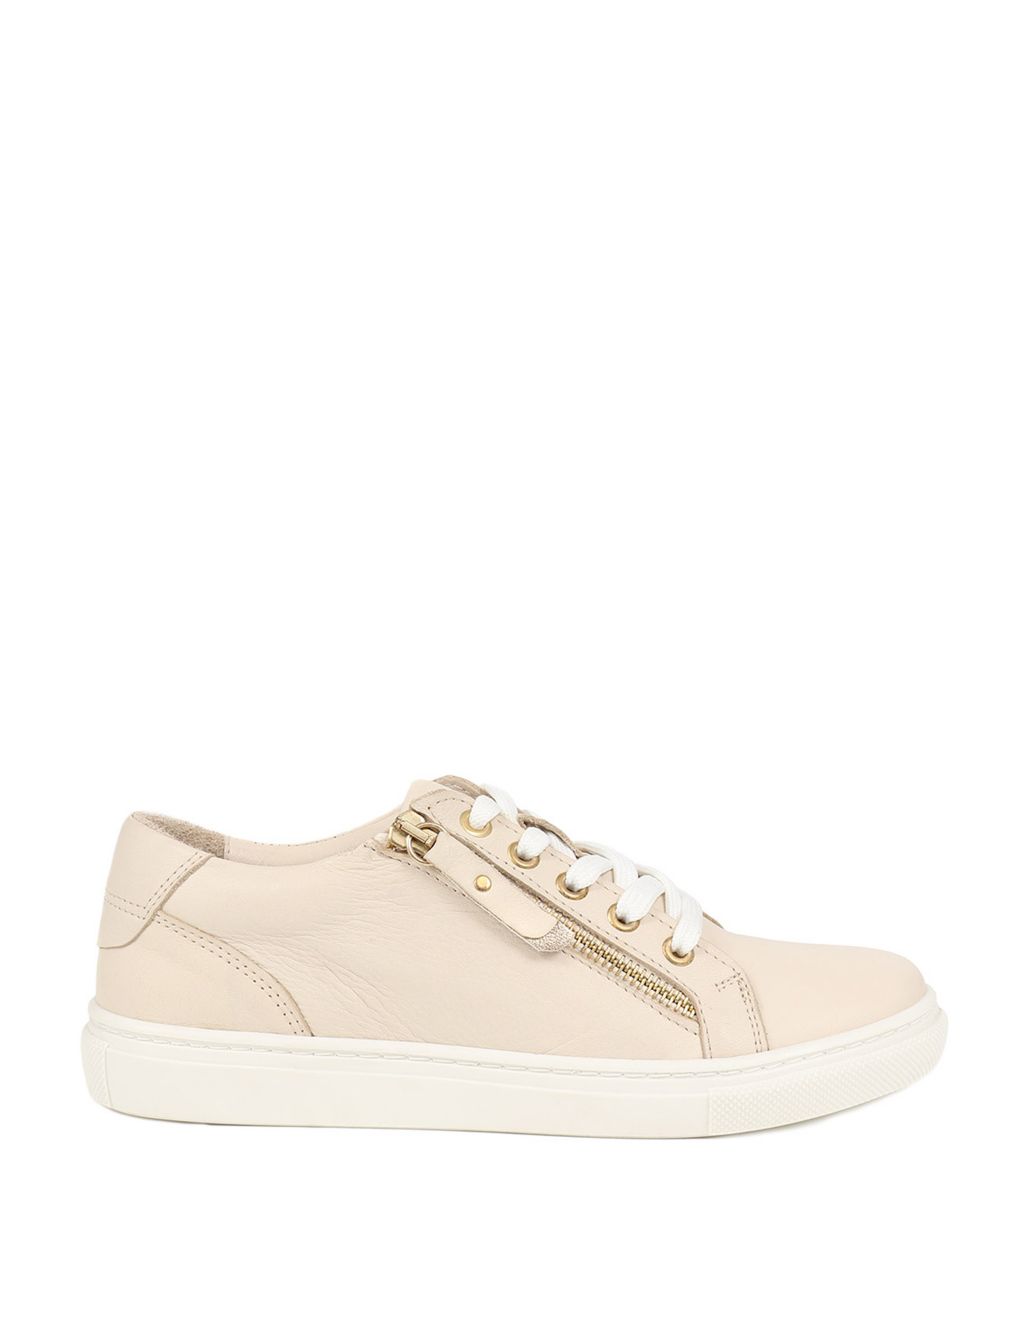 Leather Zip Up Trainers image 2